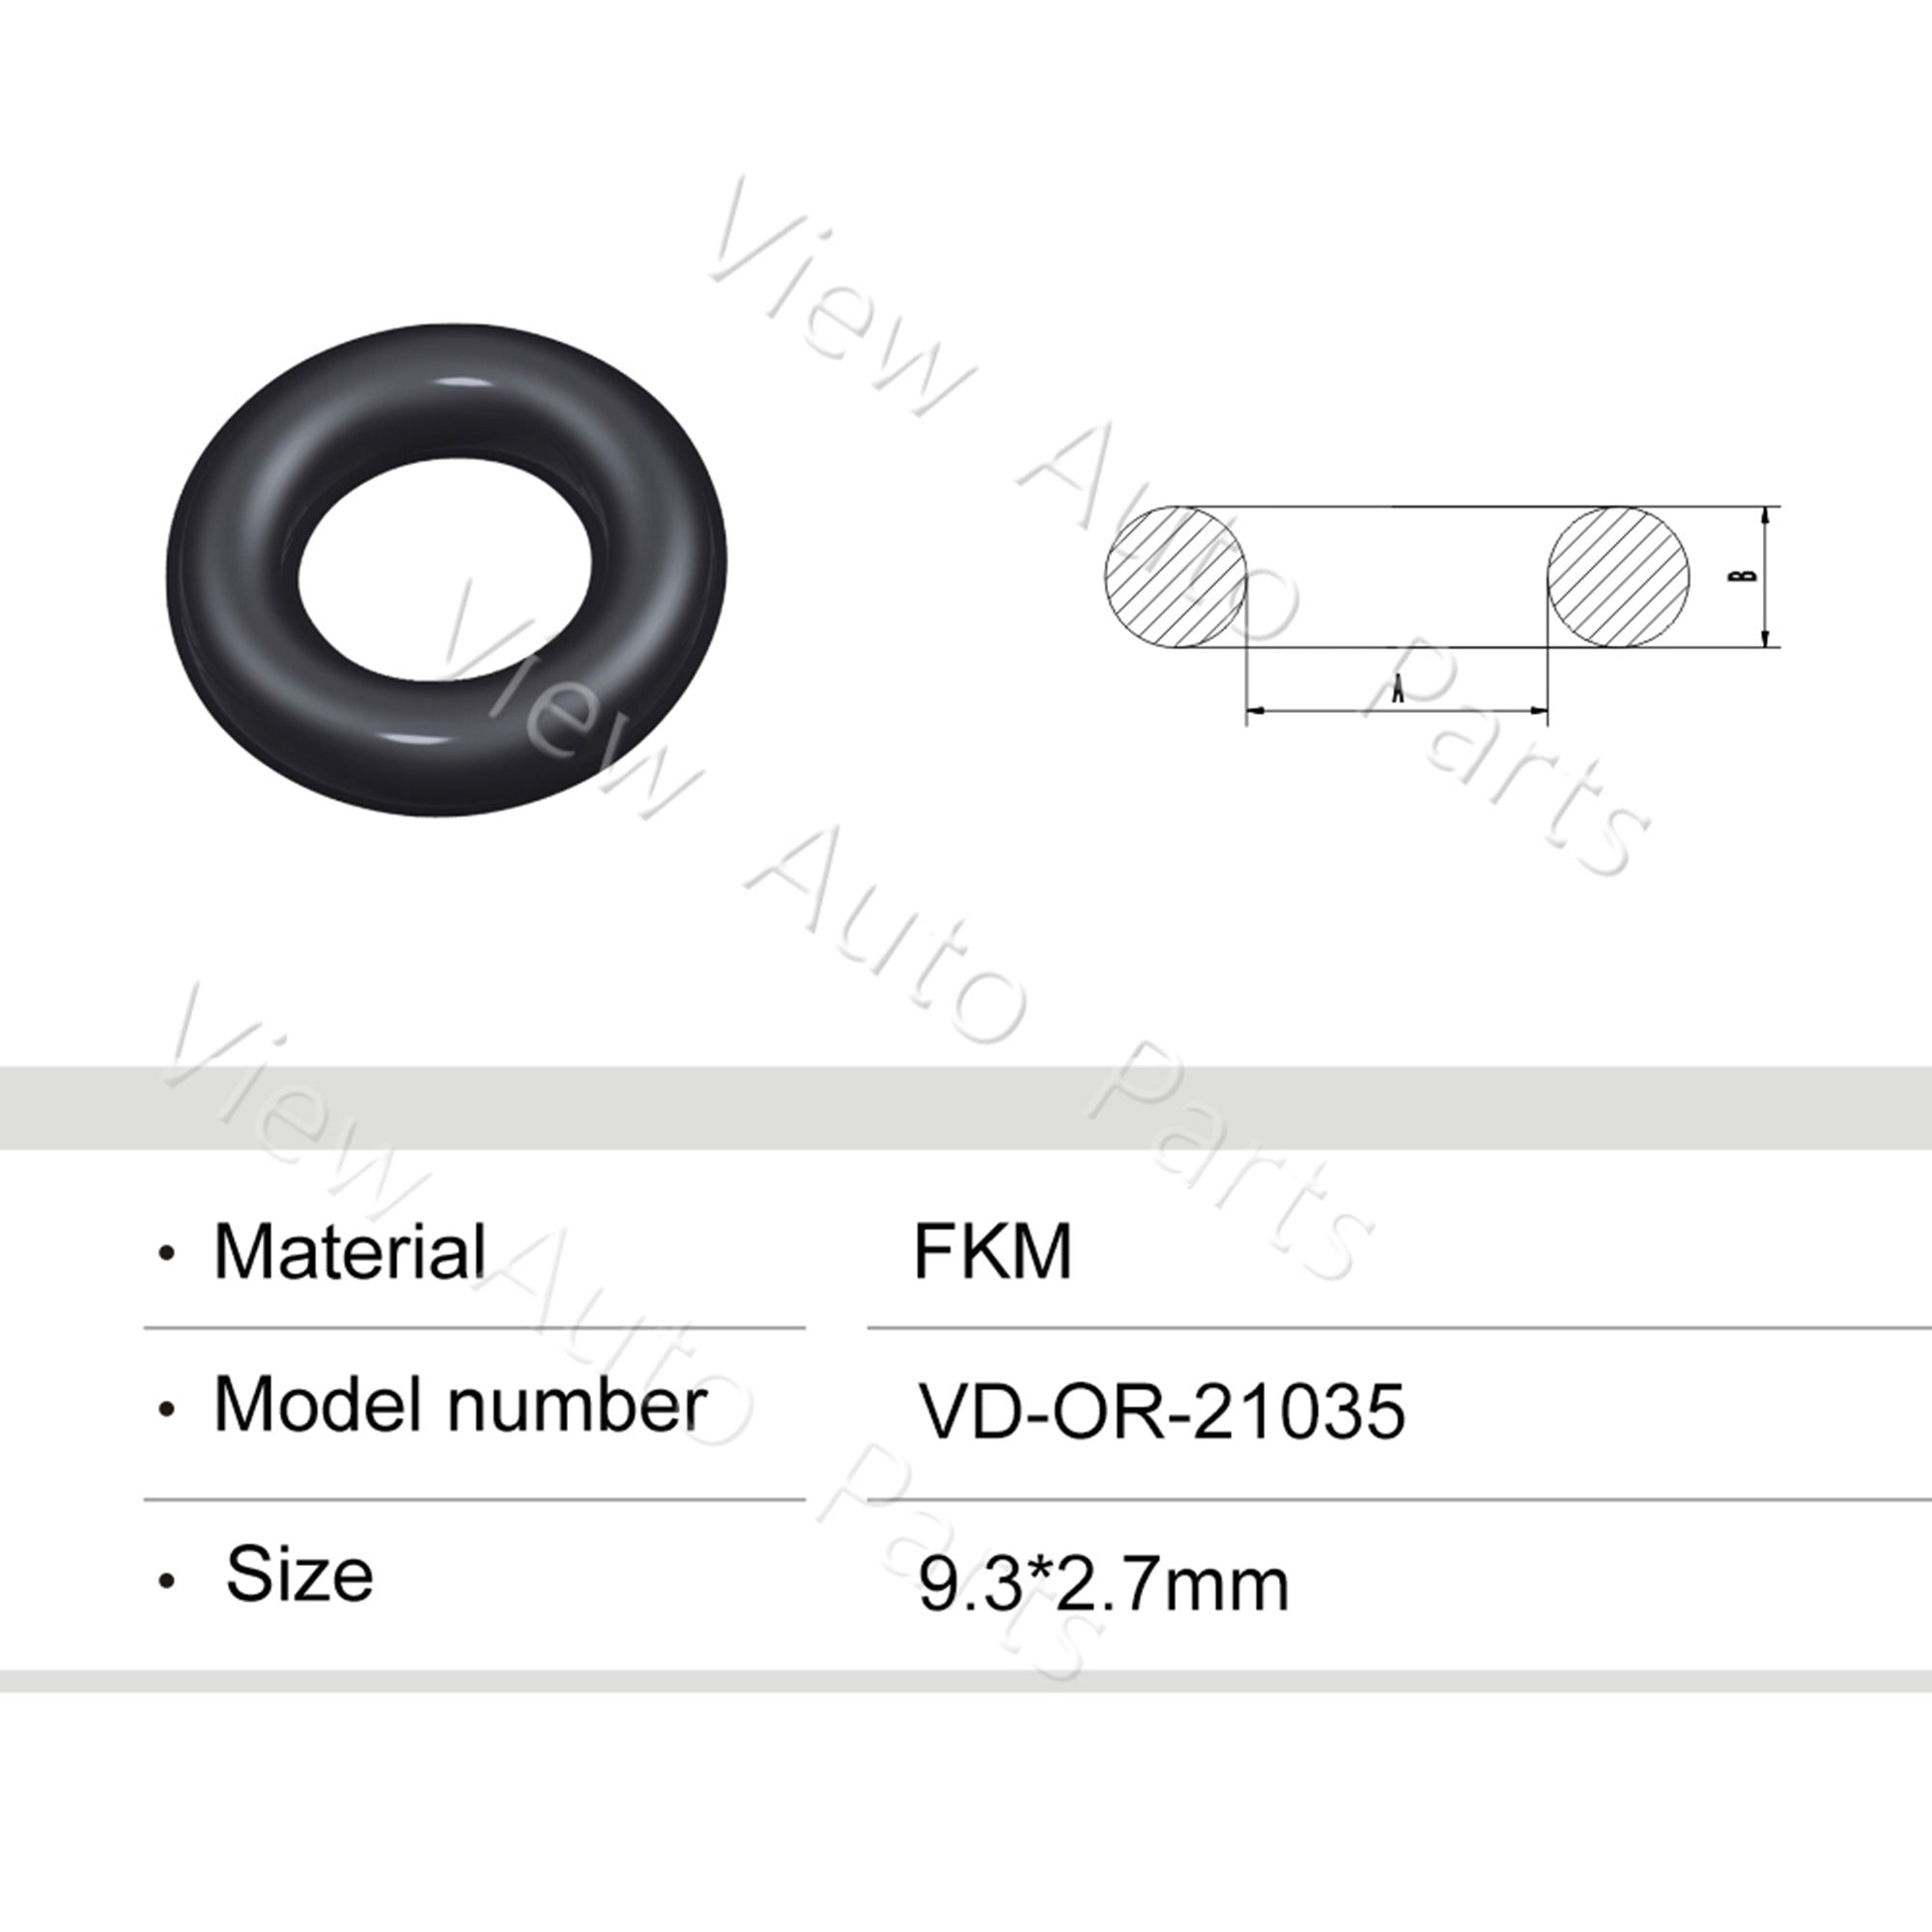 Fuel Injector Rubber Seal Orings for Fuel Injector Repair Kits FKM & Rubber Heat Resistant, Size: 9.3*2.7mm OR-21035